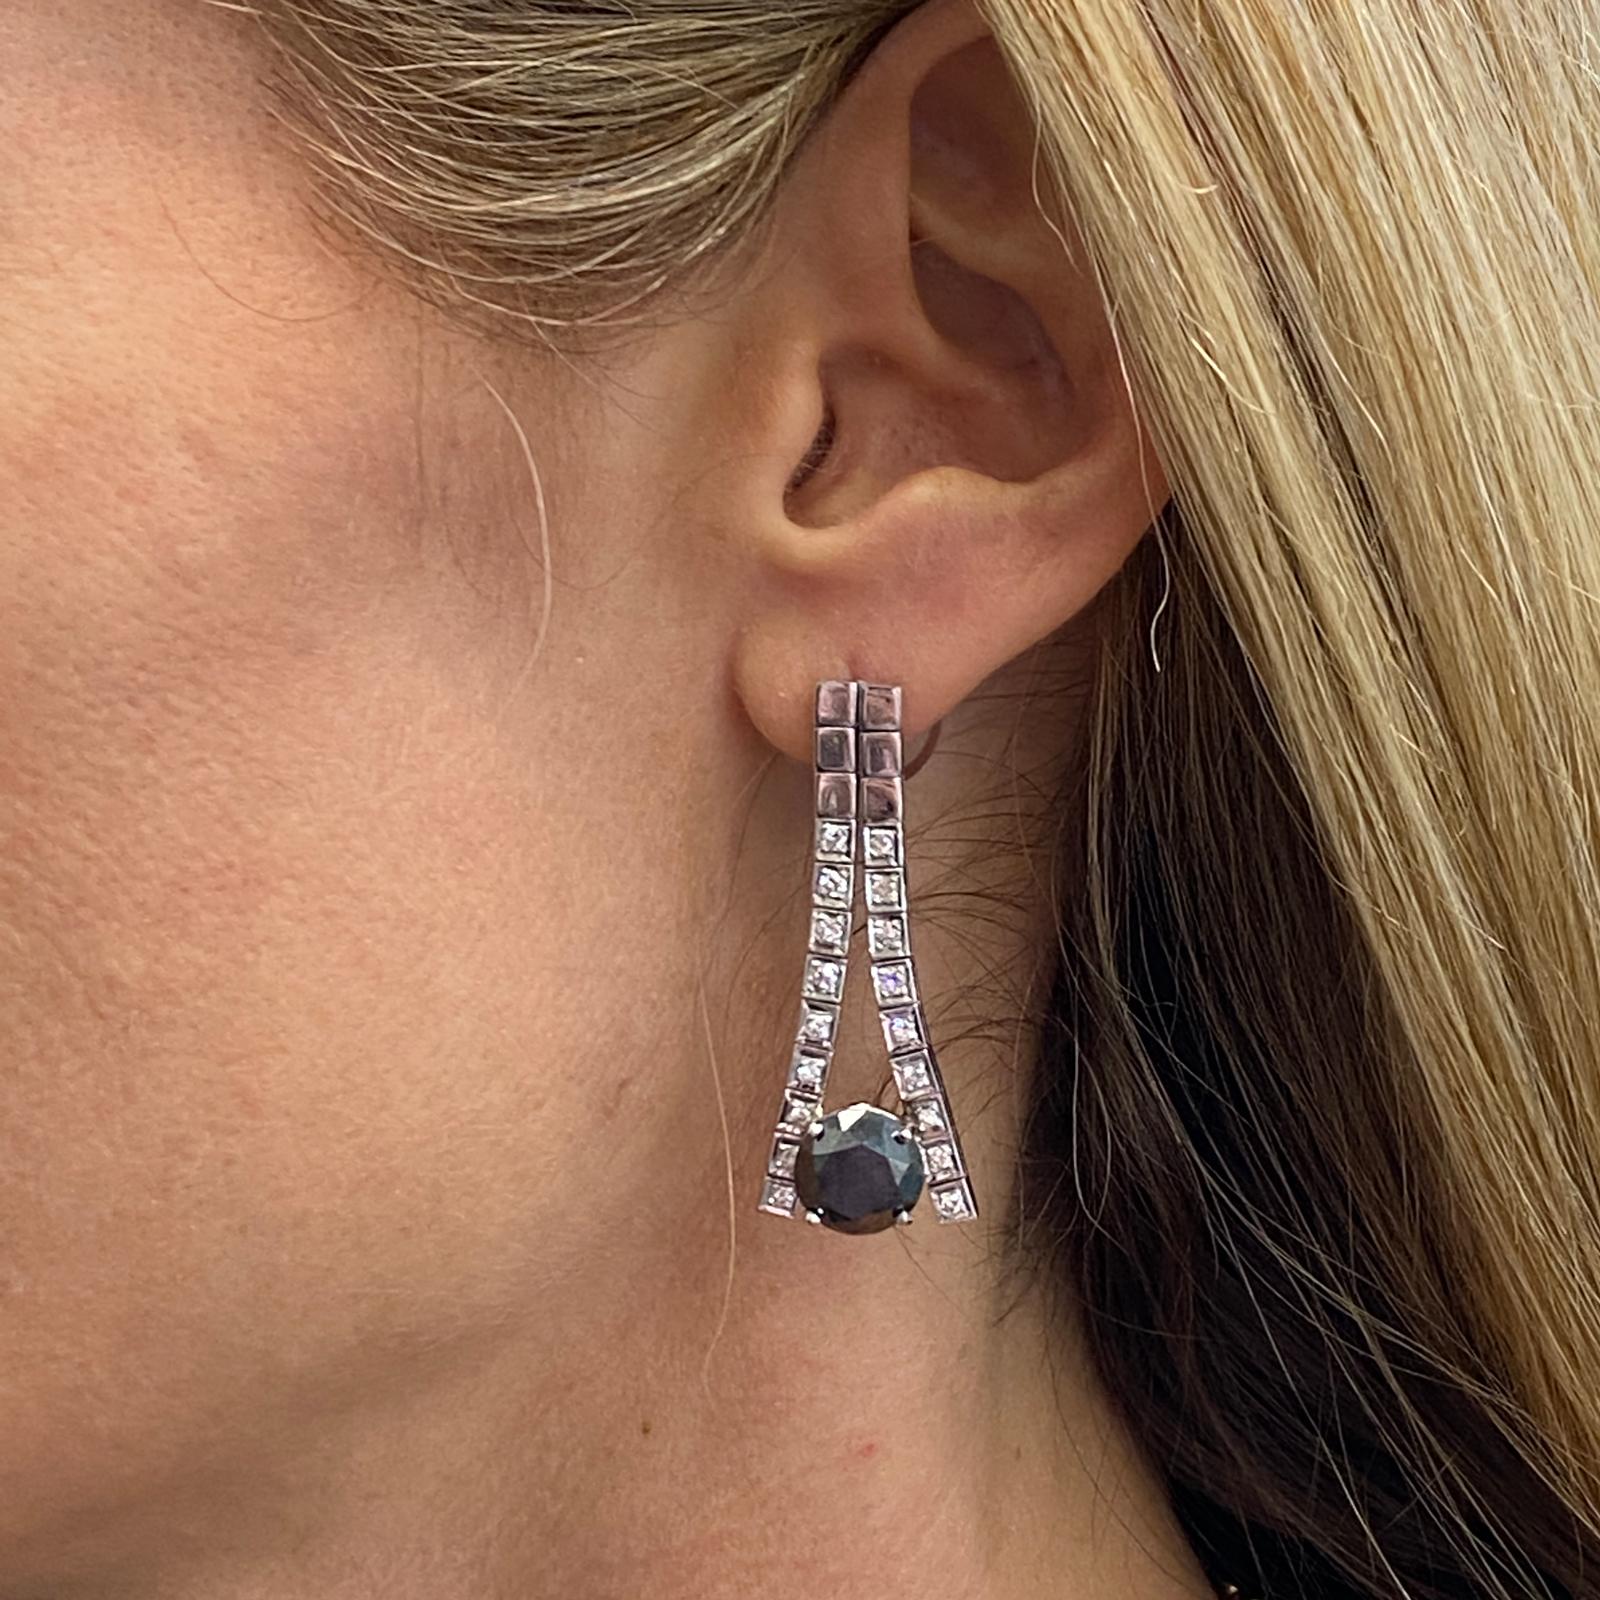 Fabulous black diamond drop earrings fashioned in 14 karat white gold. The earrings feature 2 round brilliant black diamonds weighing 8.42 carat total weight. The earrings also feature 36 round brilliant white diamonds weighing 1.25 carat total